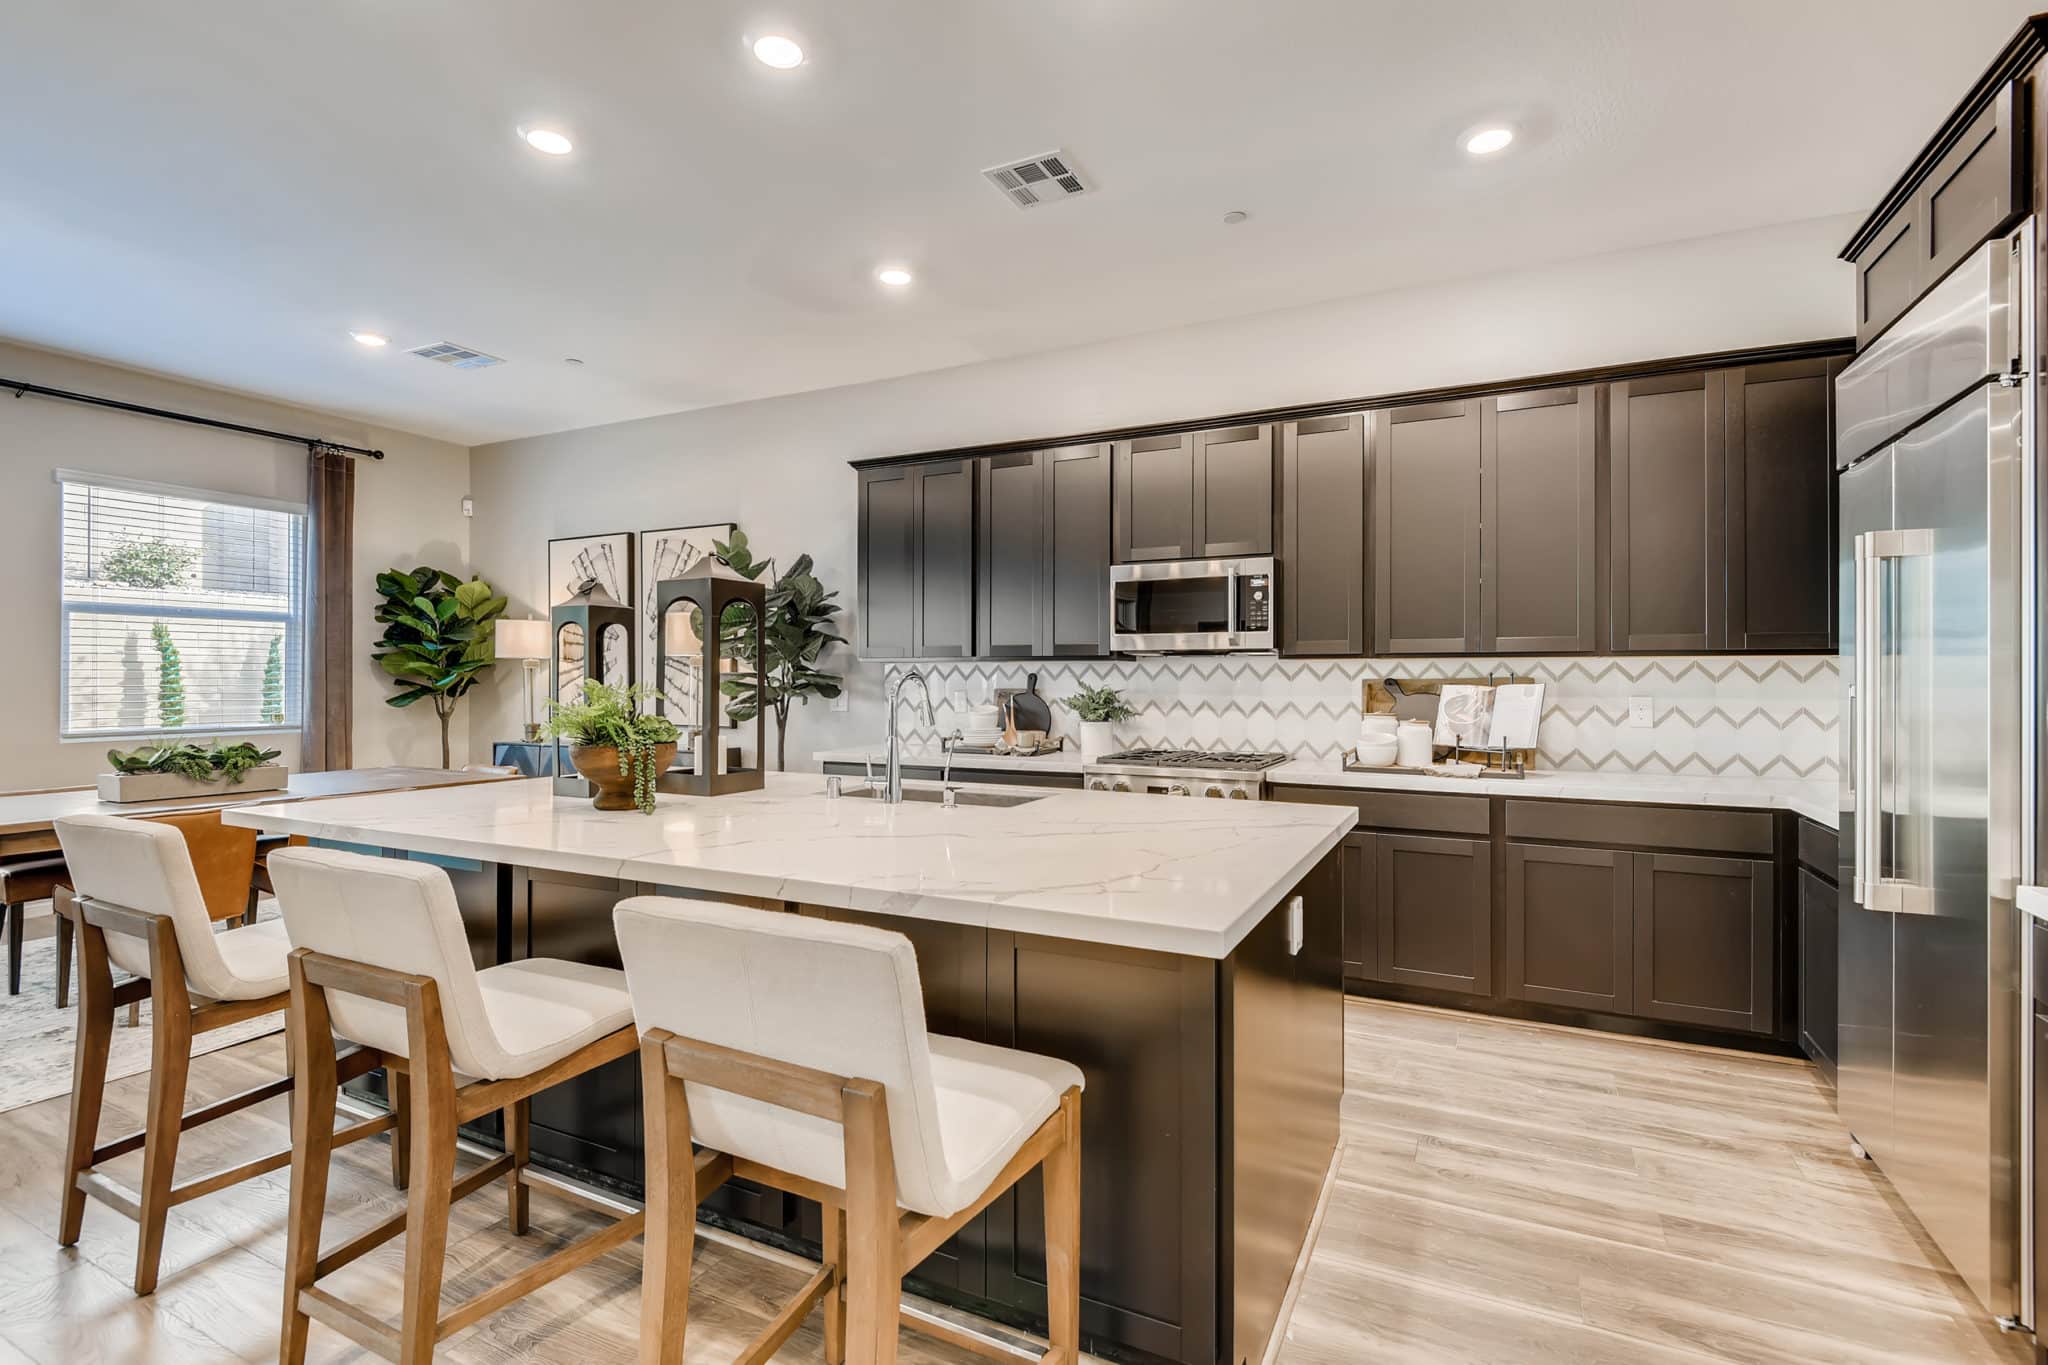 Kitchen of Everly model at Heritage by Lennar